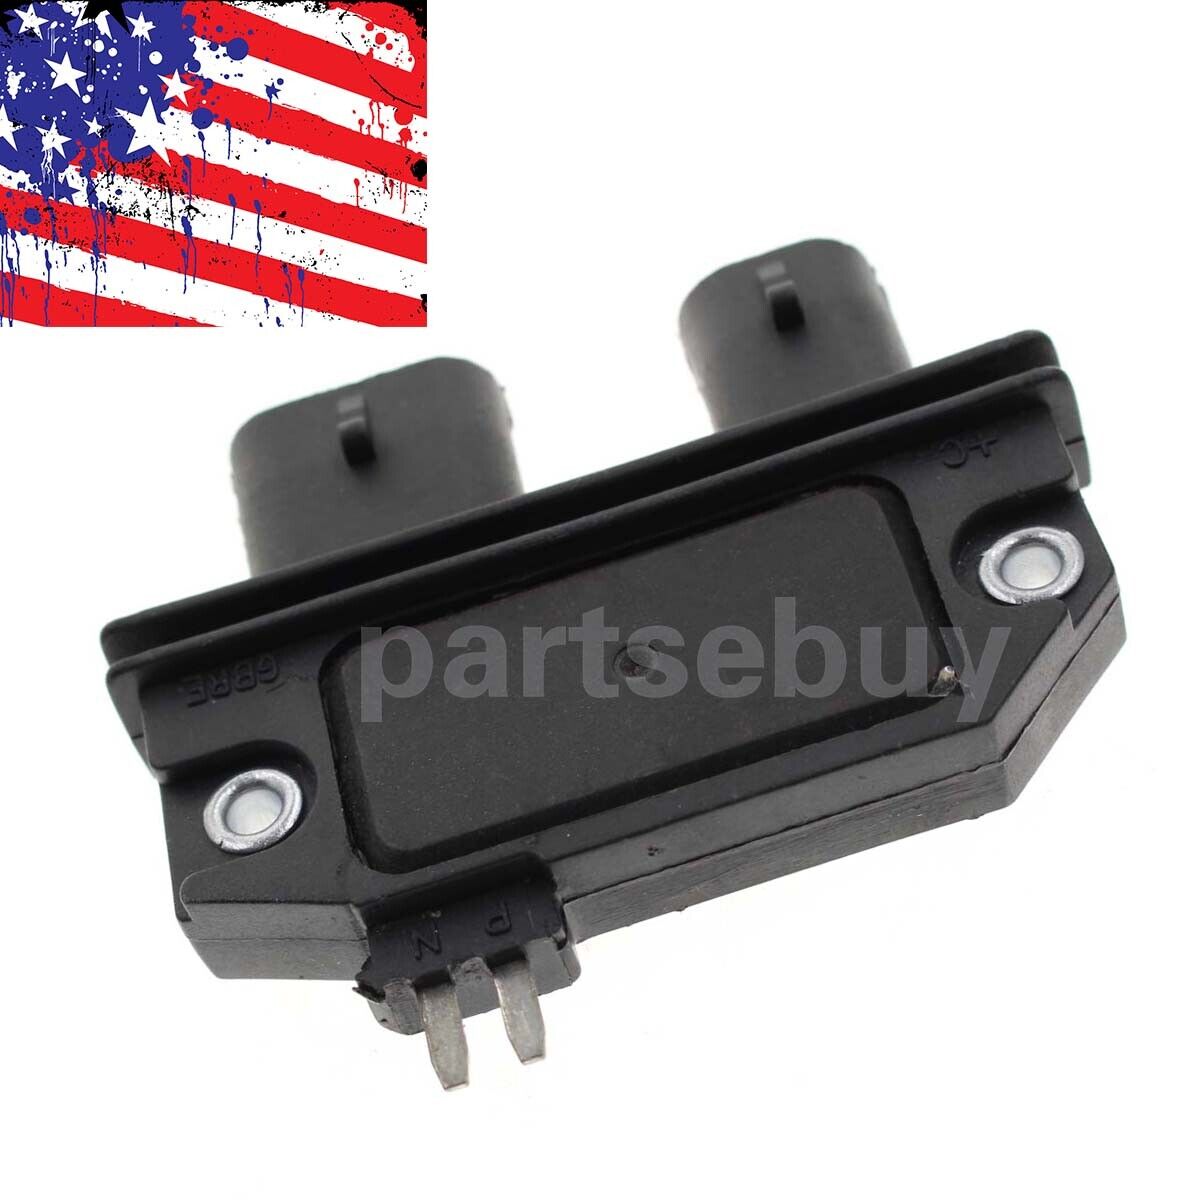 811637T Ranking TOP9 811637001 18-5107-1 3854003 Ignition Me Lowest price challenge Module VOLVO for